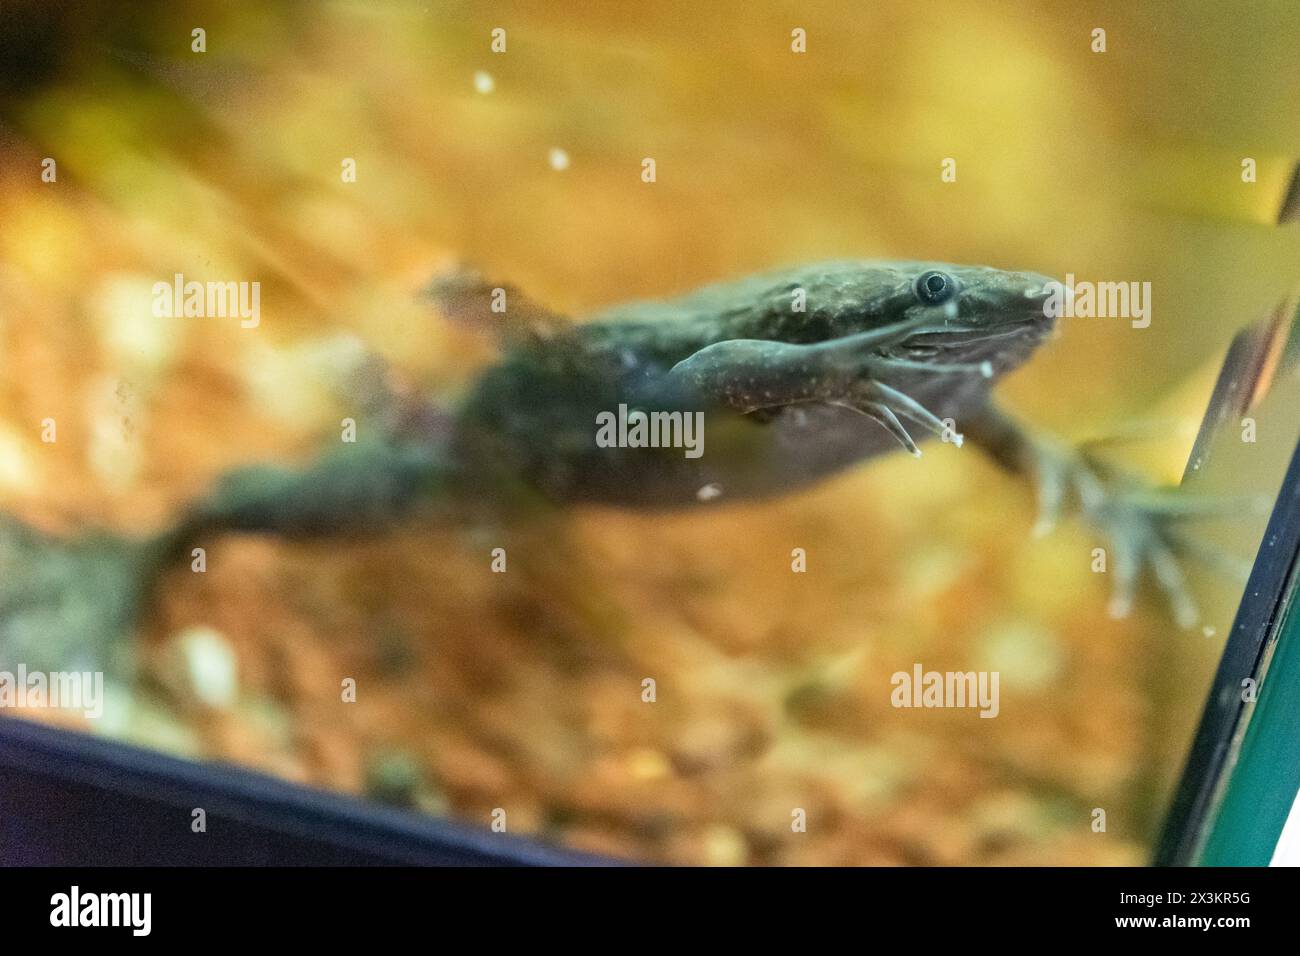 Carvalho's surinam toad swimming in a fish tank Stock Photo